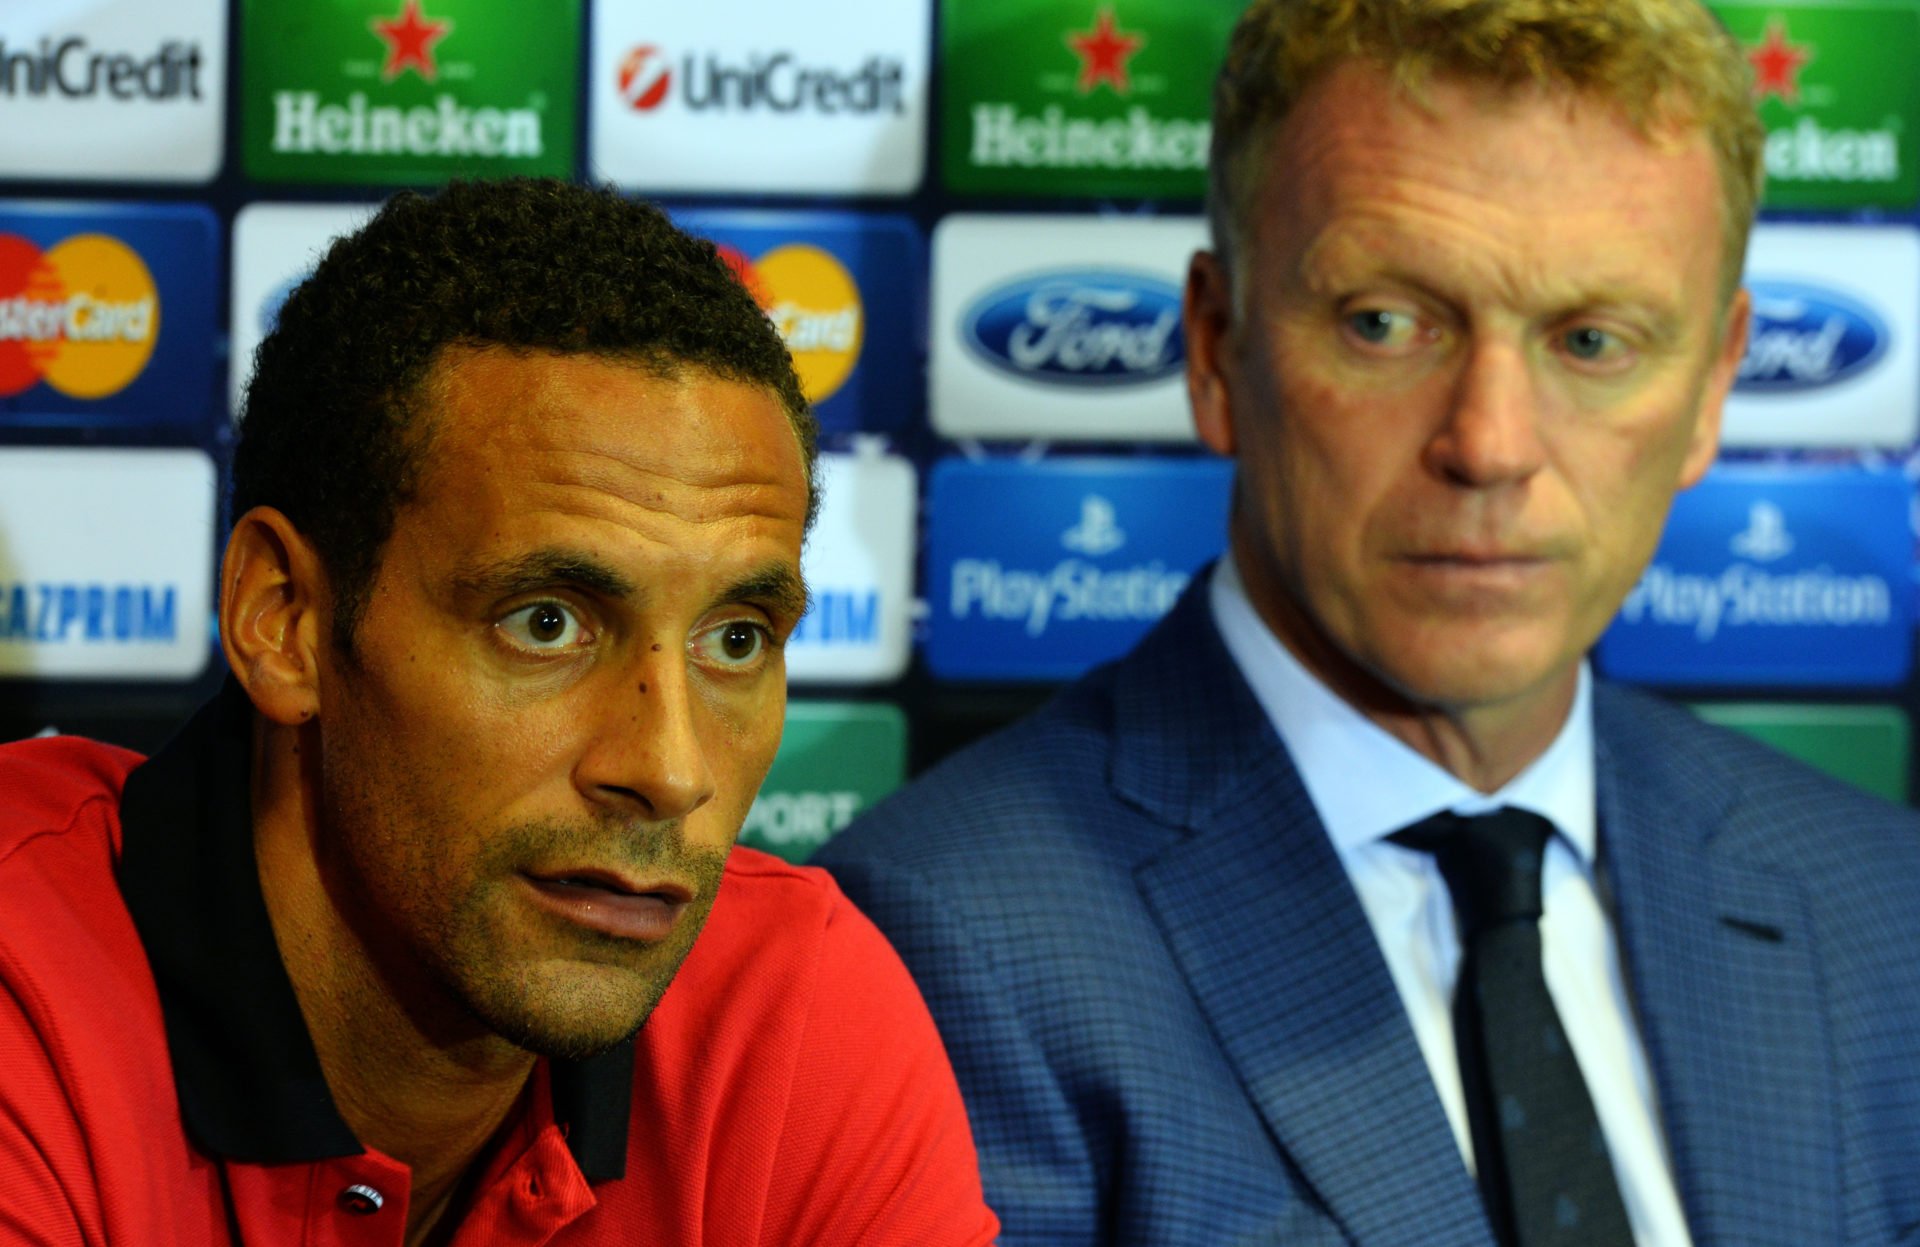 Rio asks big Moyes question but is instantly shut down by Arsenal super fan